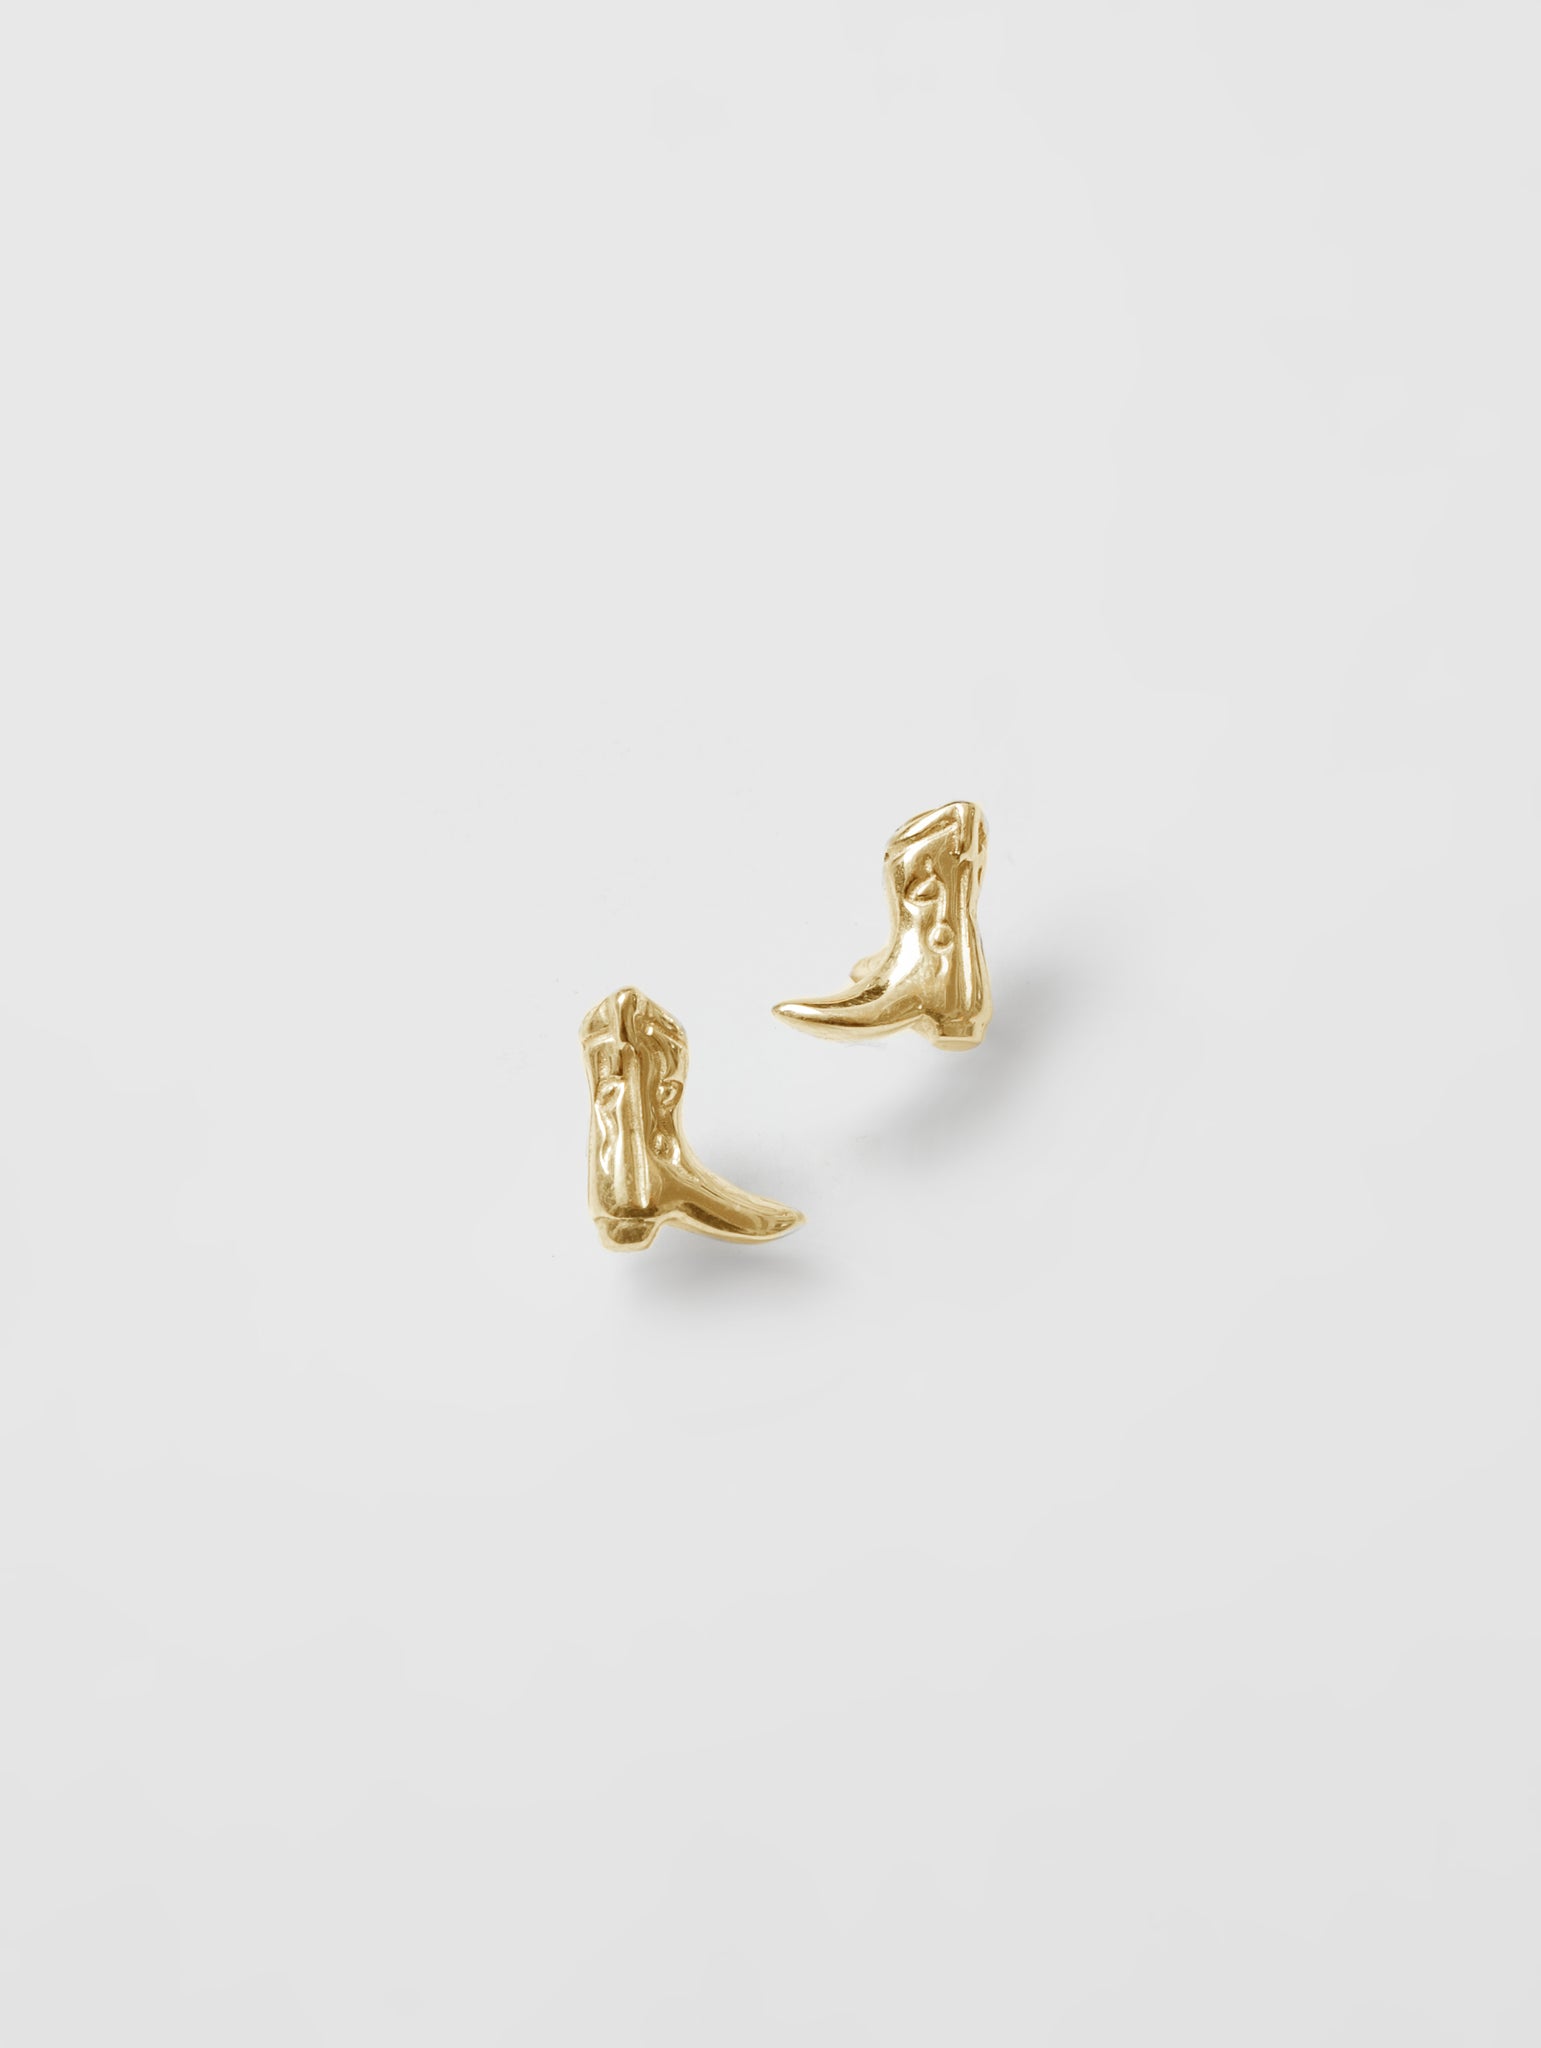 Cowboy Boot Charm Studs in Gold TBL